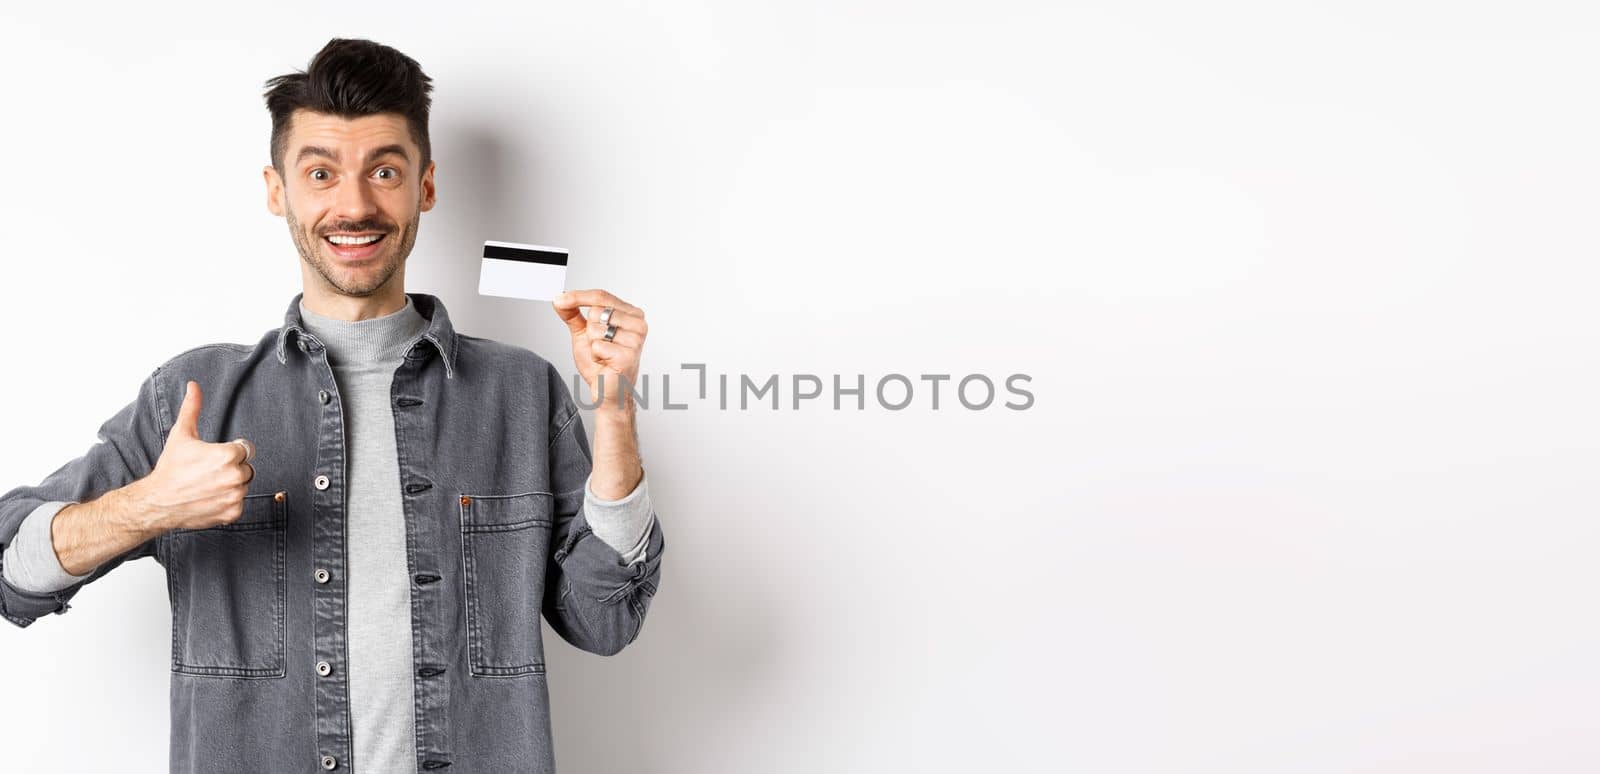 Very good. Smiling guy with plastic credit card showing thumbs up, smiling satisfied, recommend bank, standing on white background.